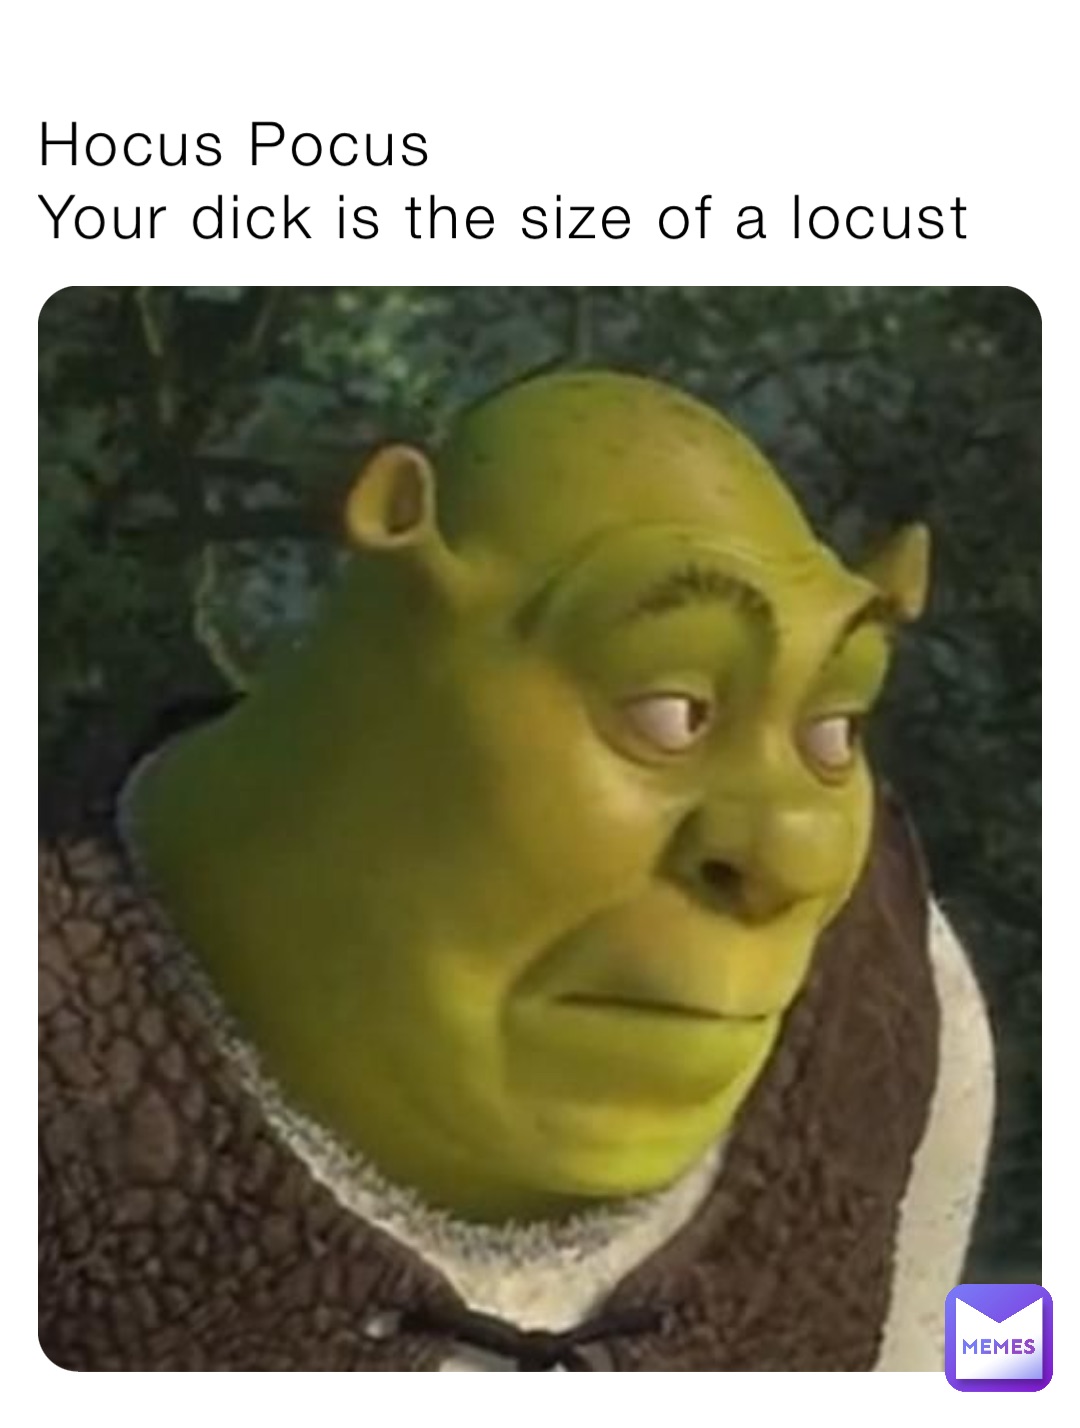 Hocus Pocus
Your dick is the size of a locust